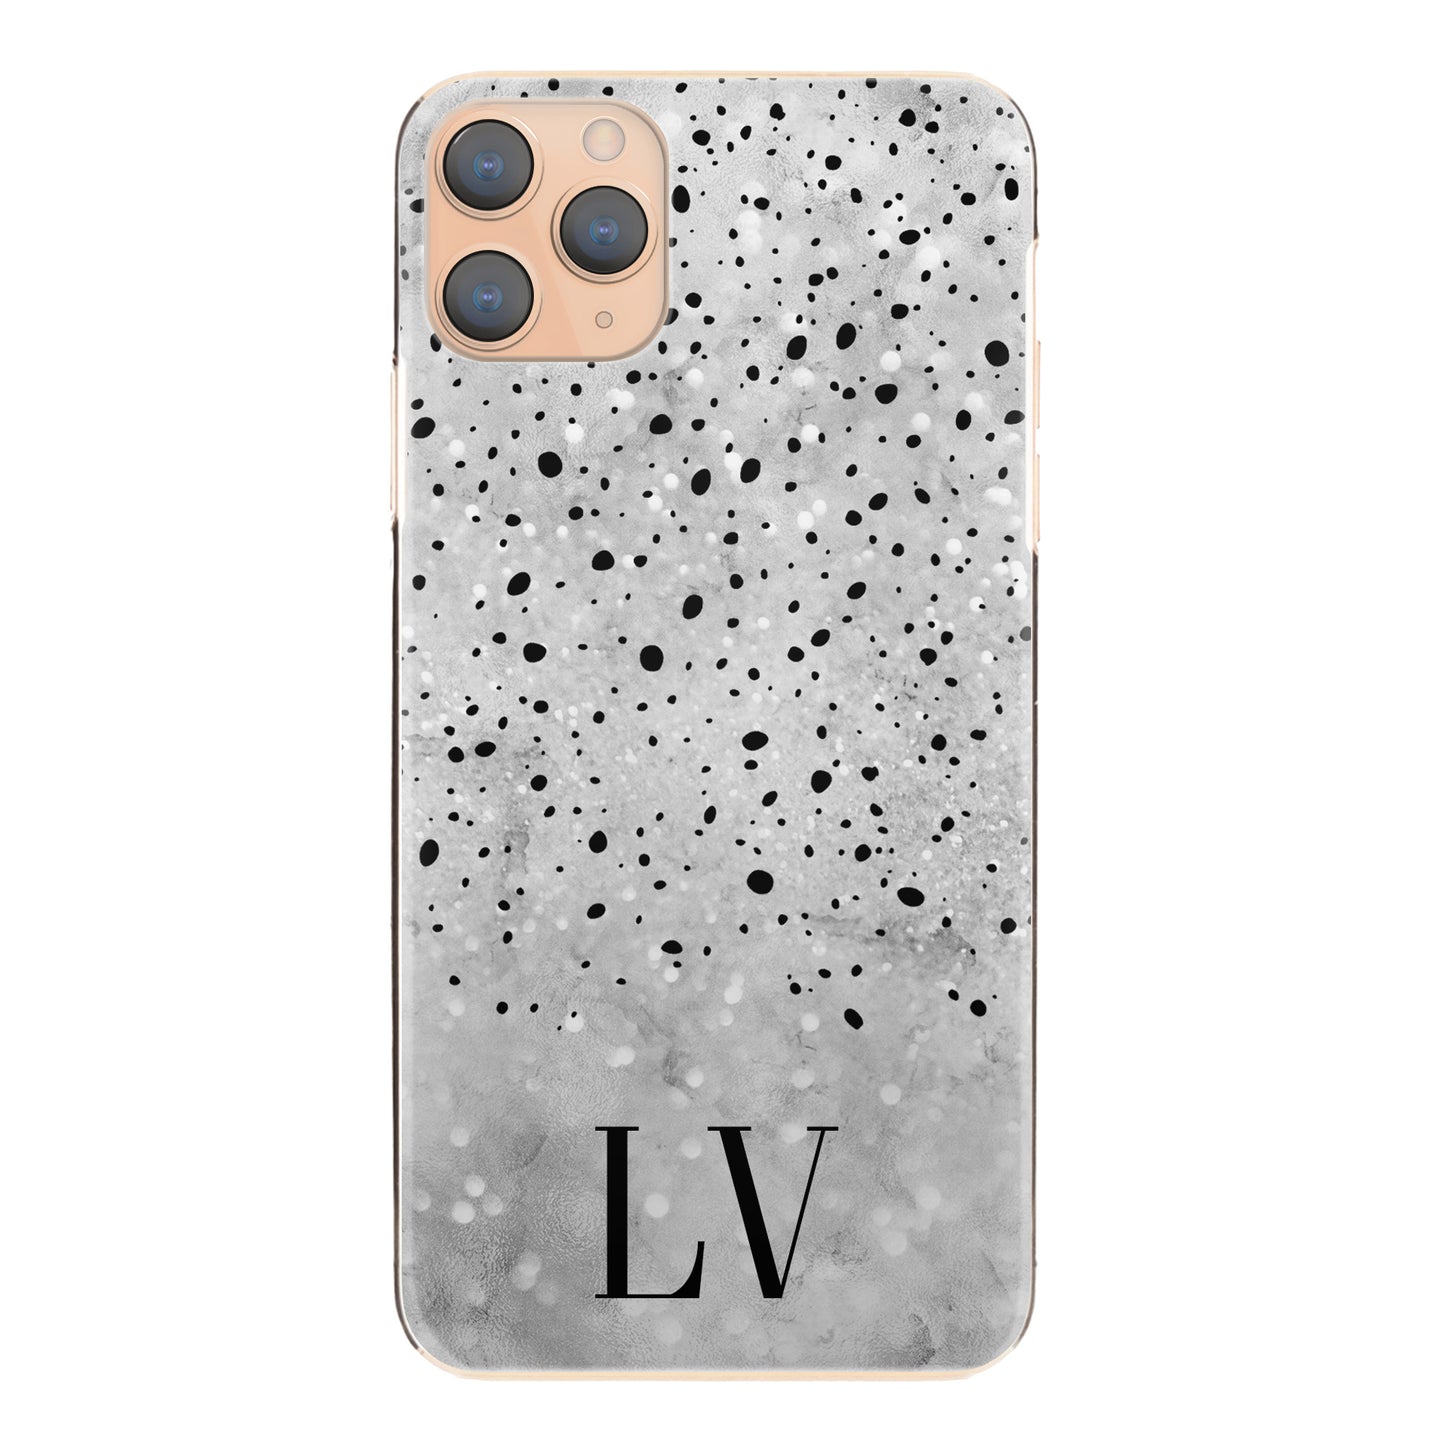 Personalised Nokia Phone Hard Case with Classy Initials on Textured Grey and Black Dots